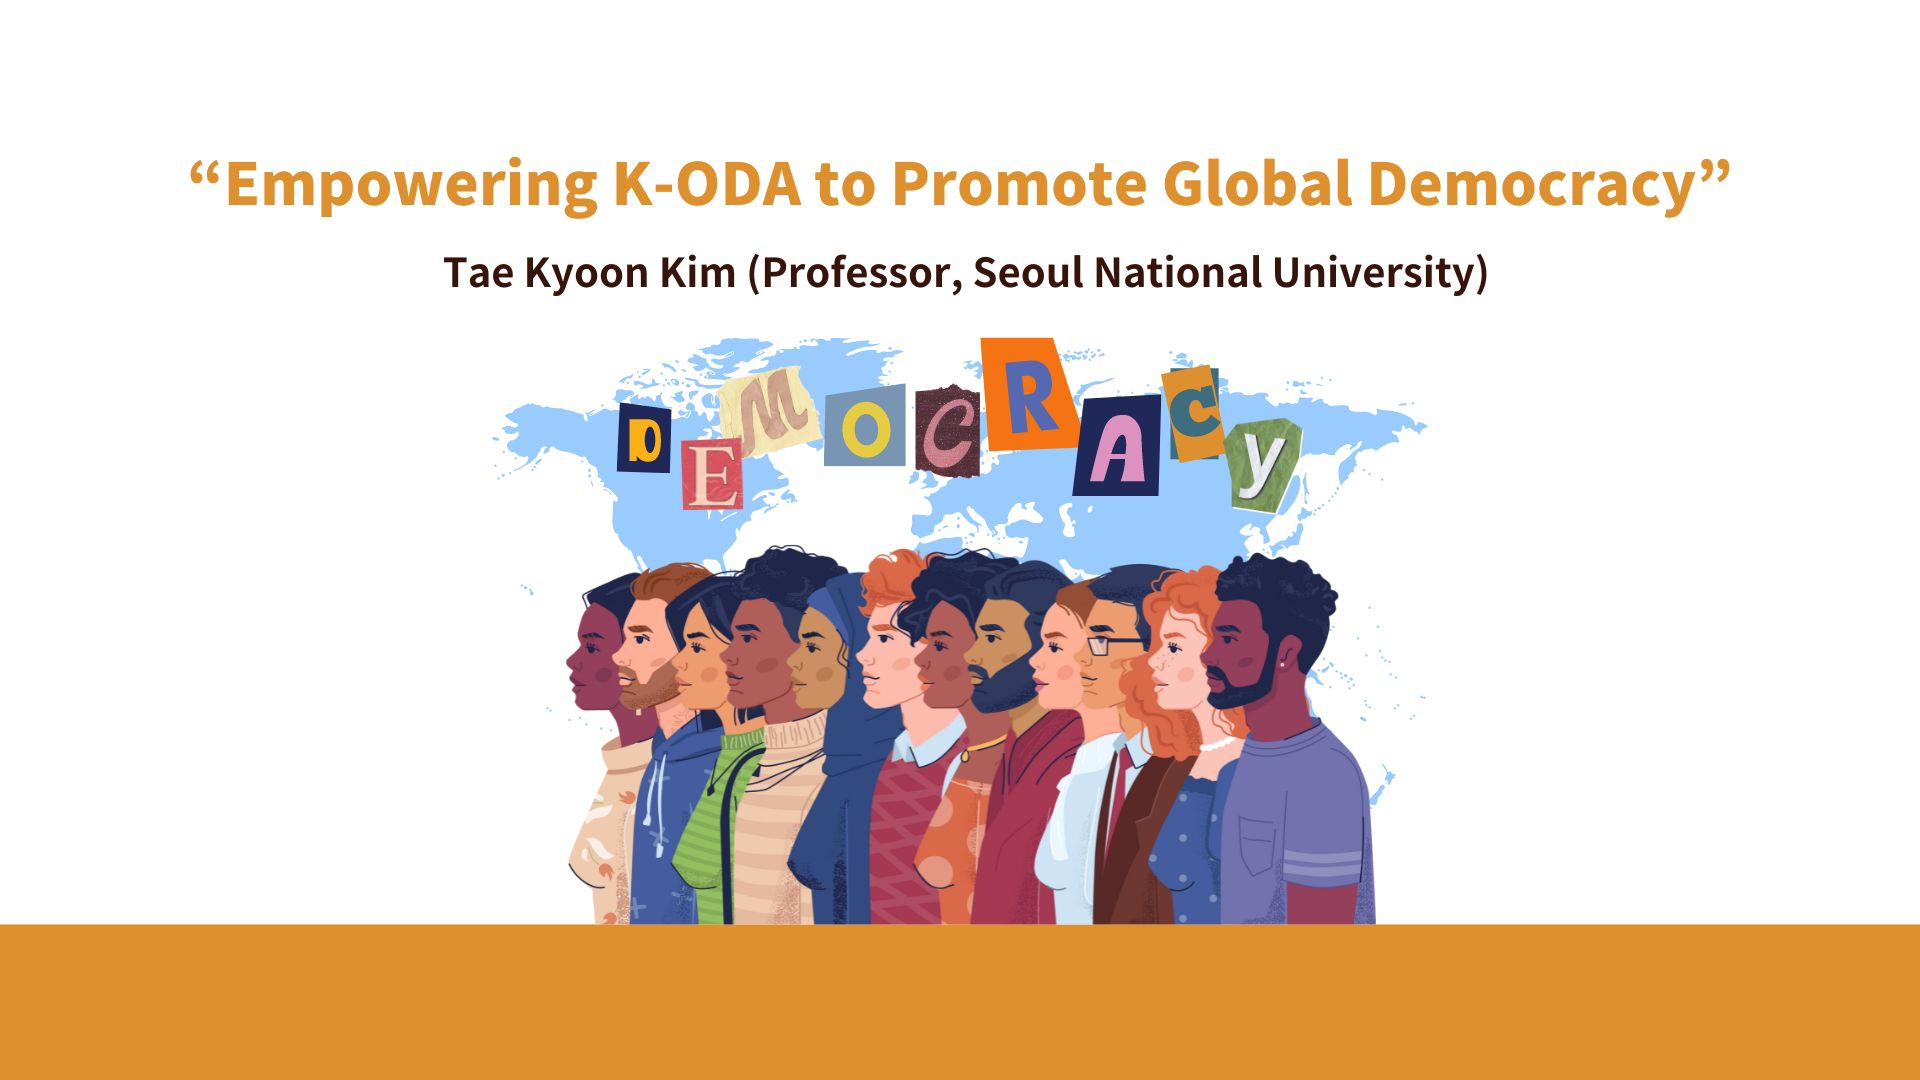 [EAI Roundtable] Supporting Global Democracy through Official Development Assistance (ODA)